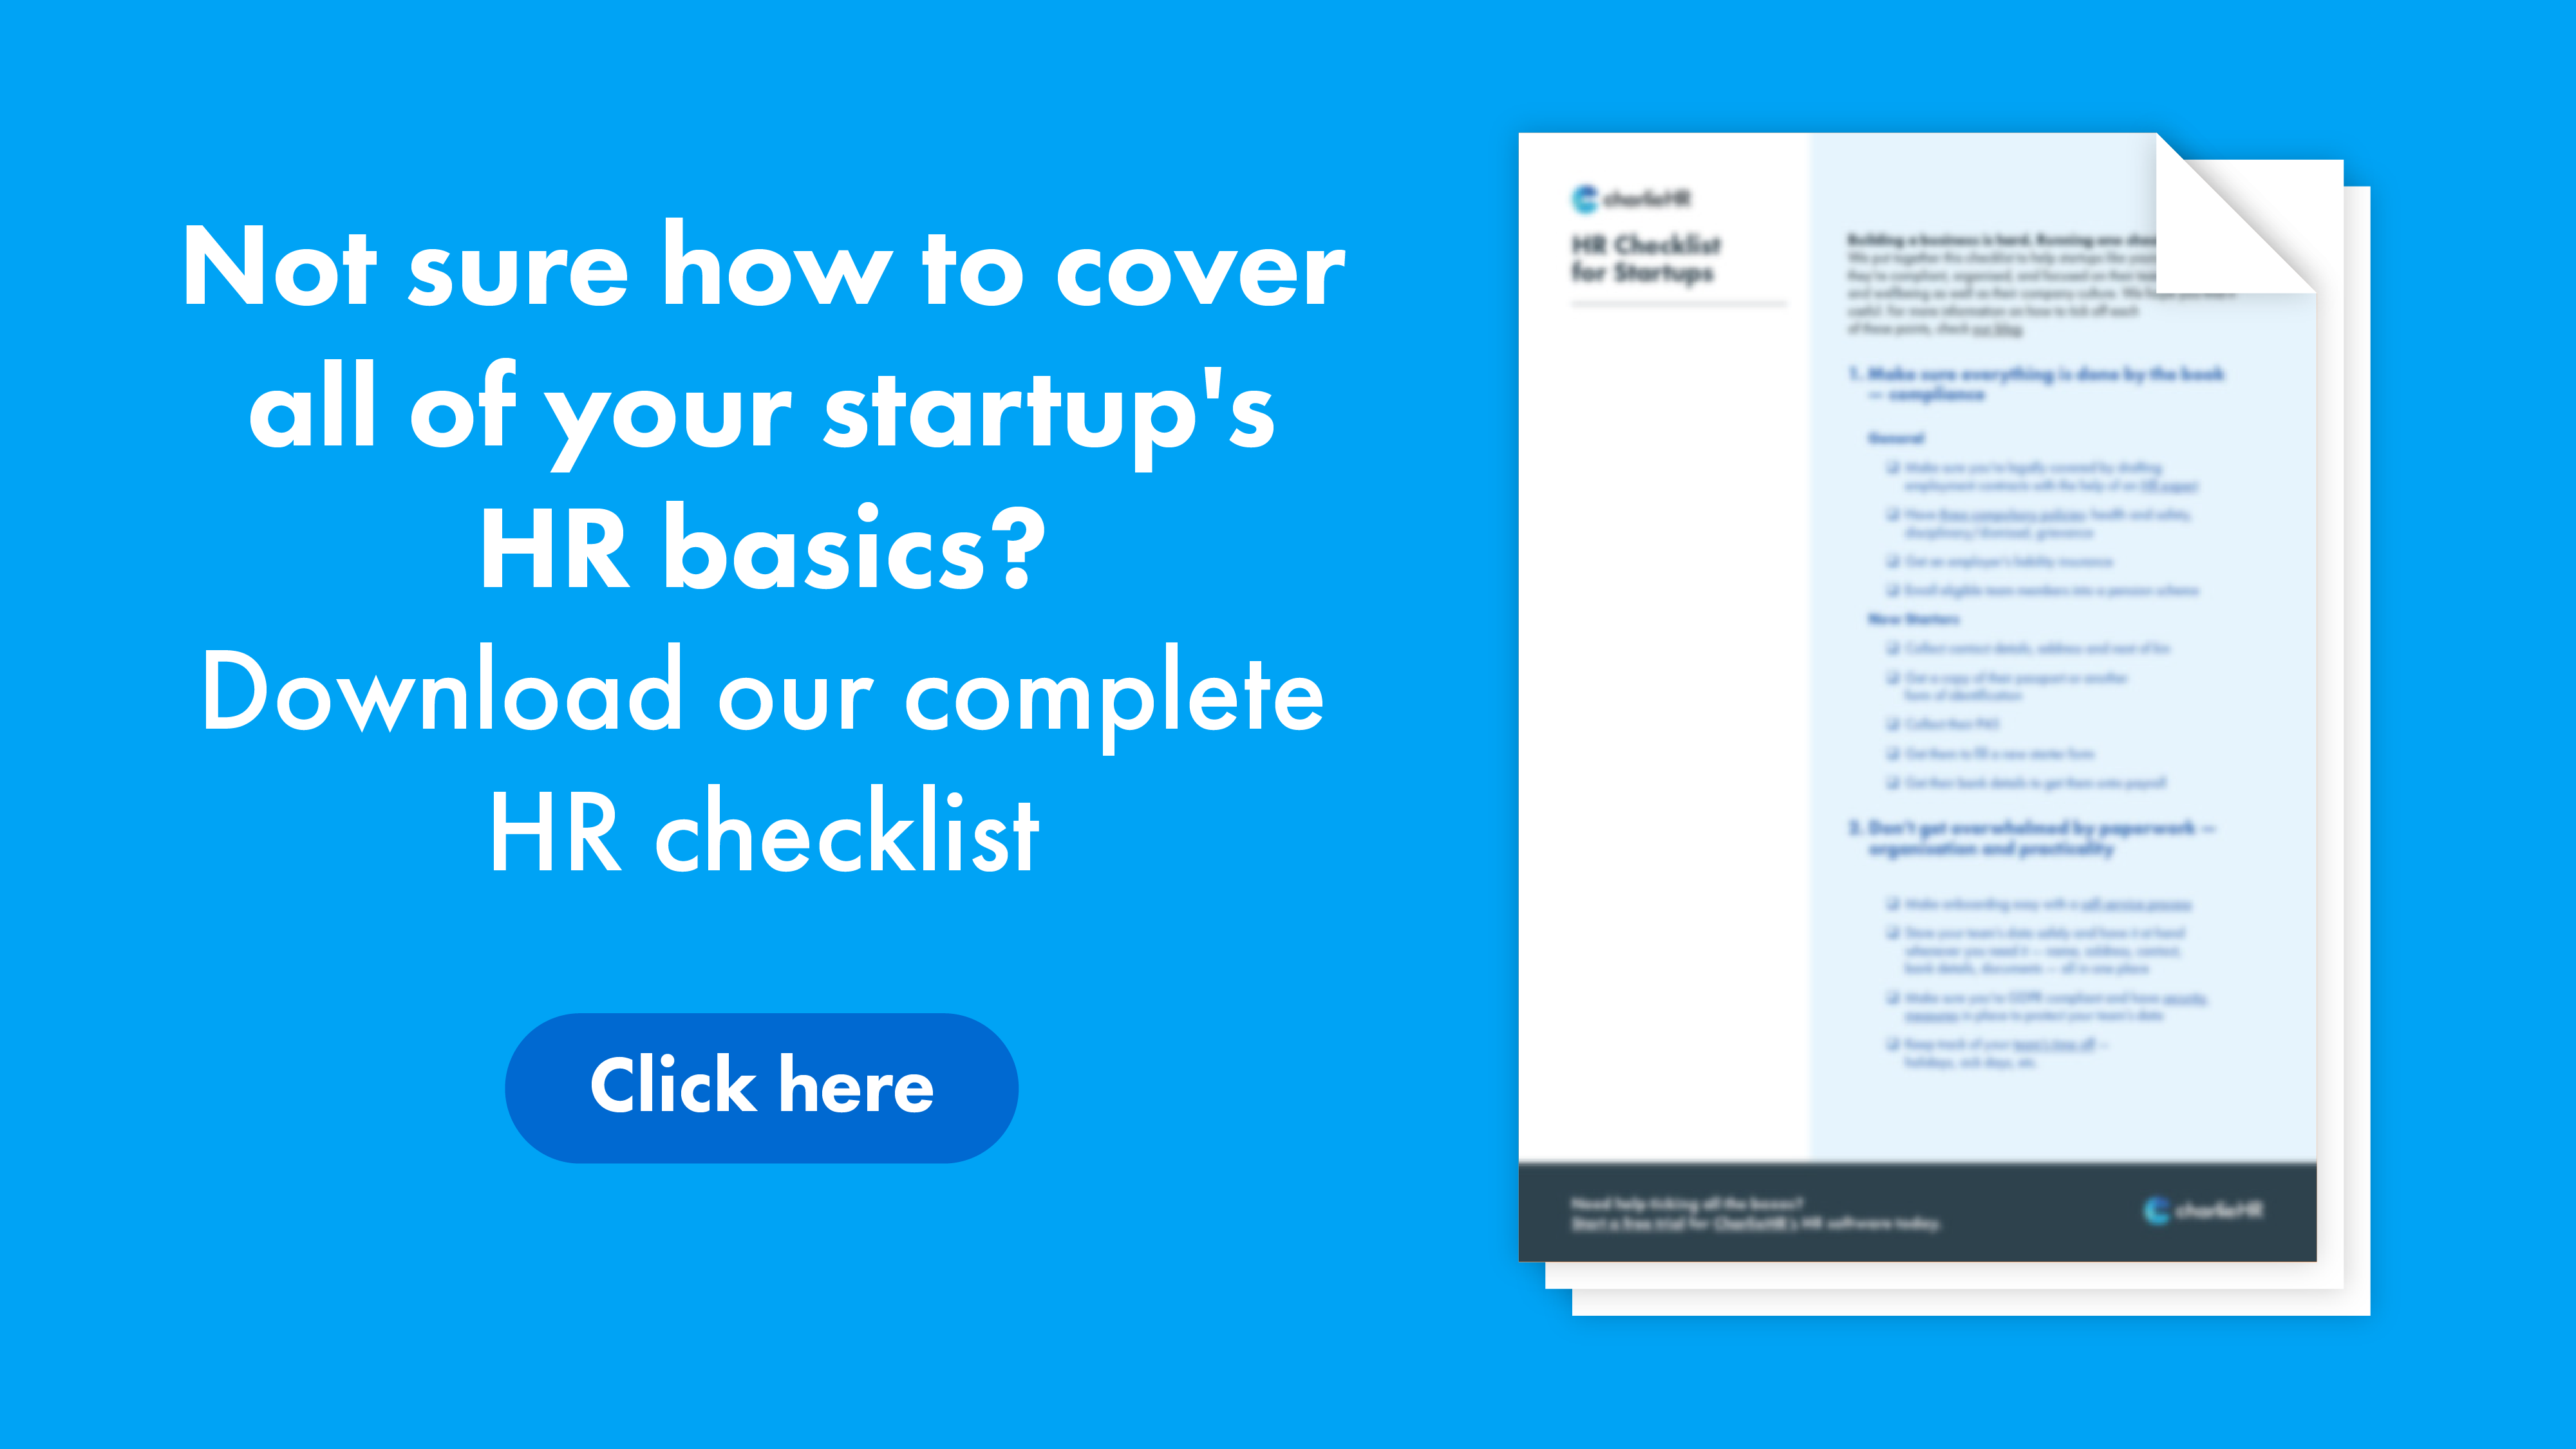 Click here to download our HR checklist